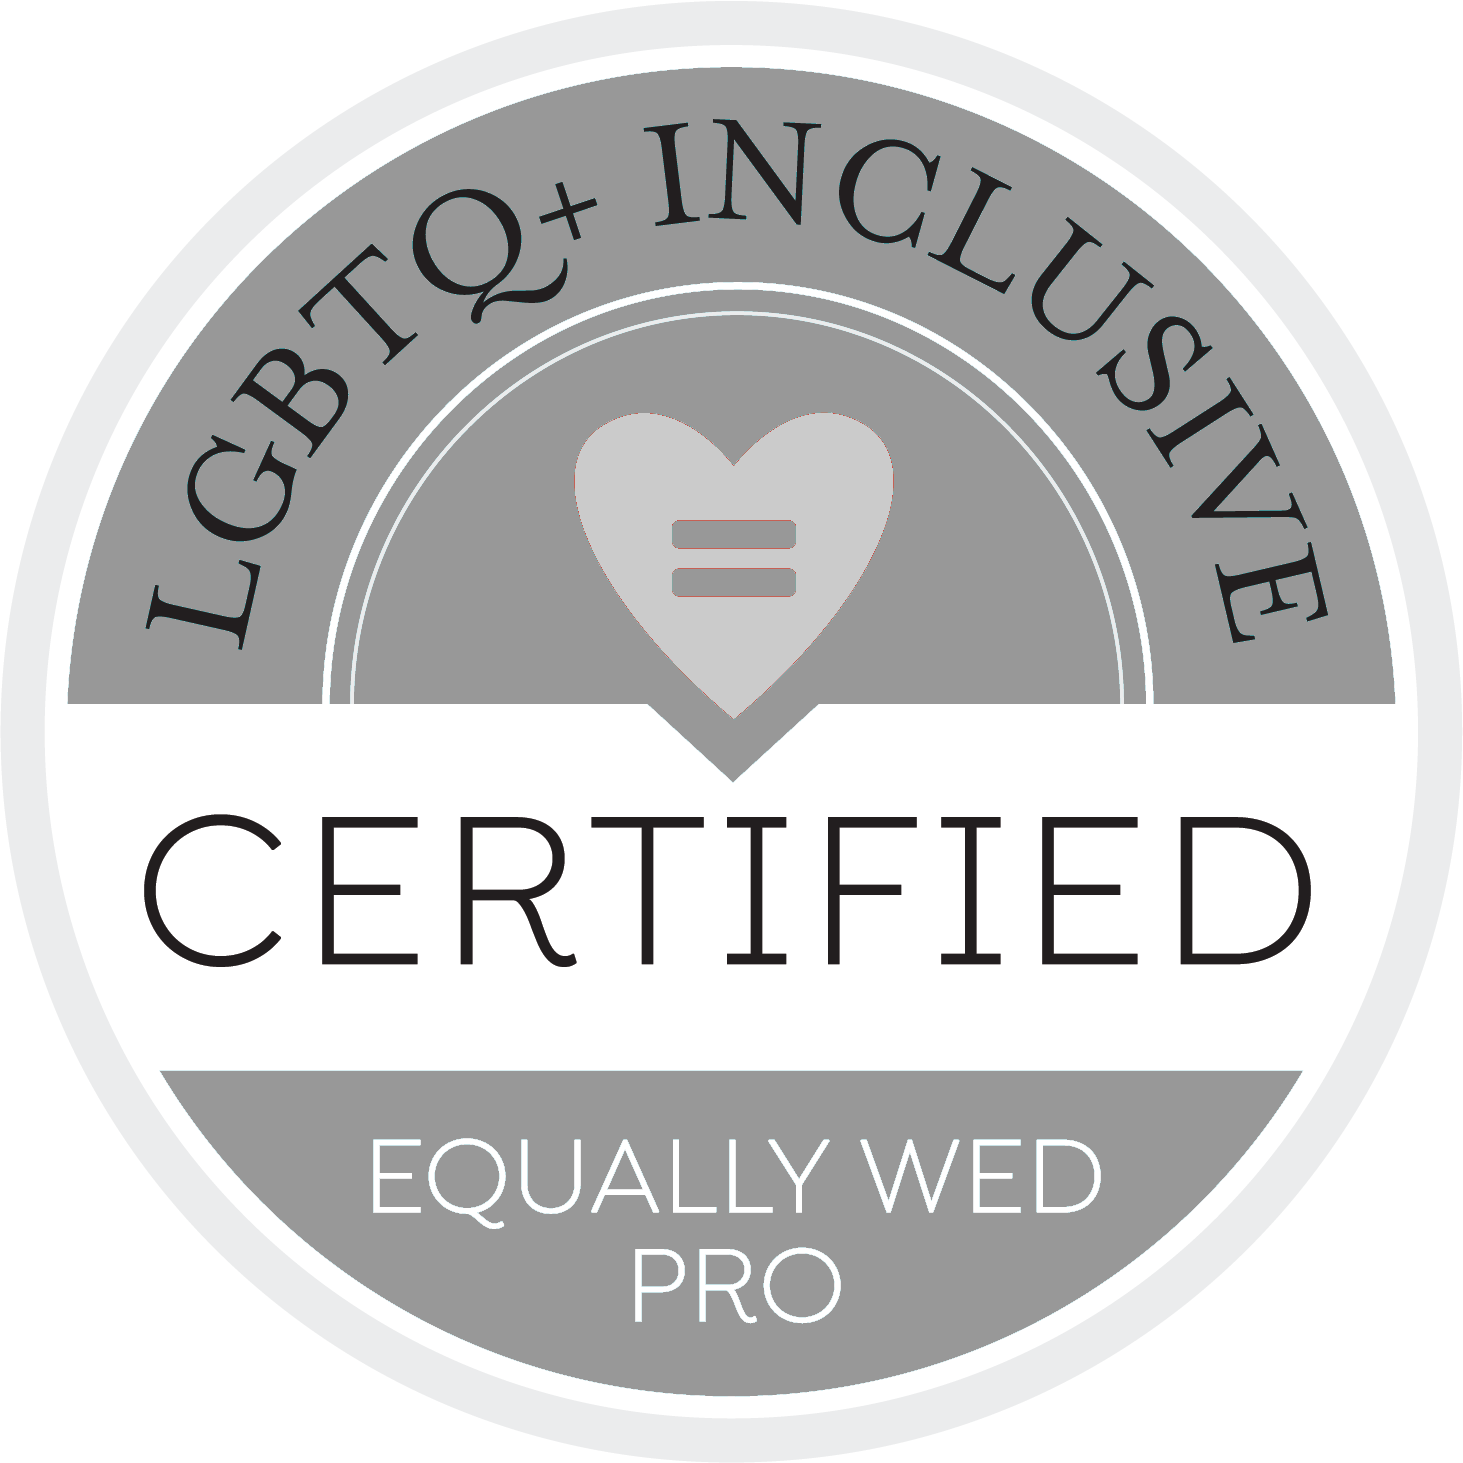 Equally Wed Pro Certification Badge